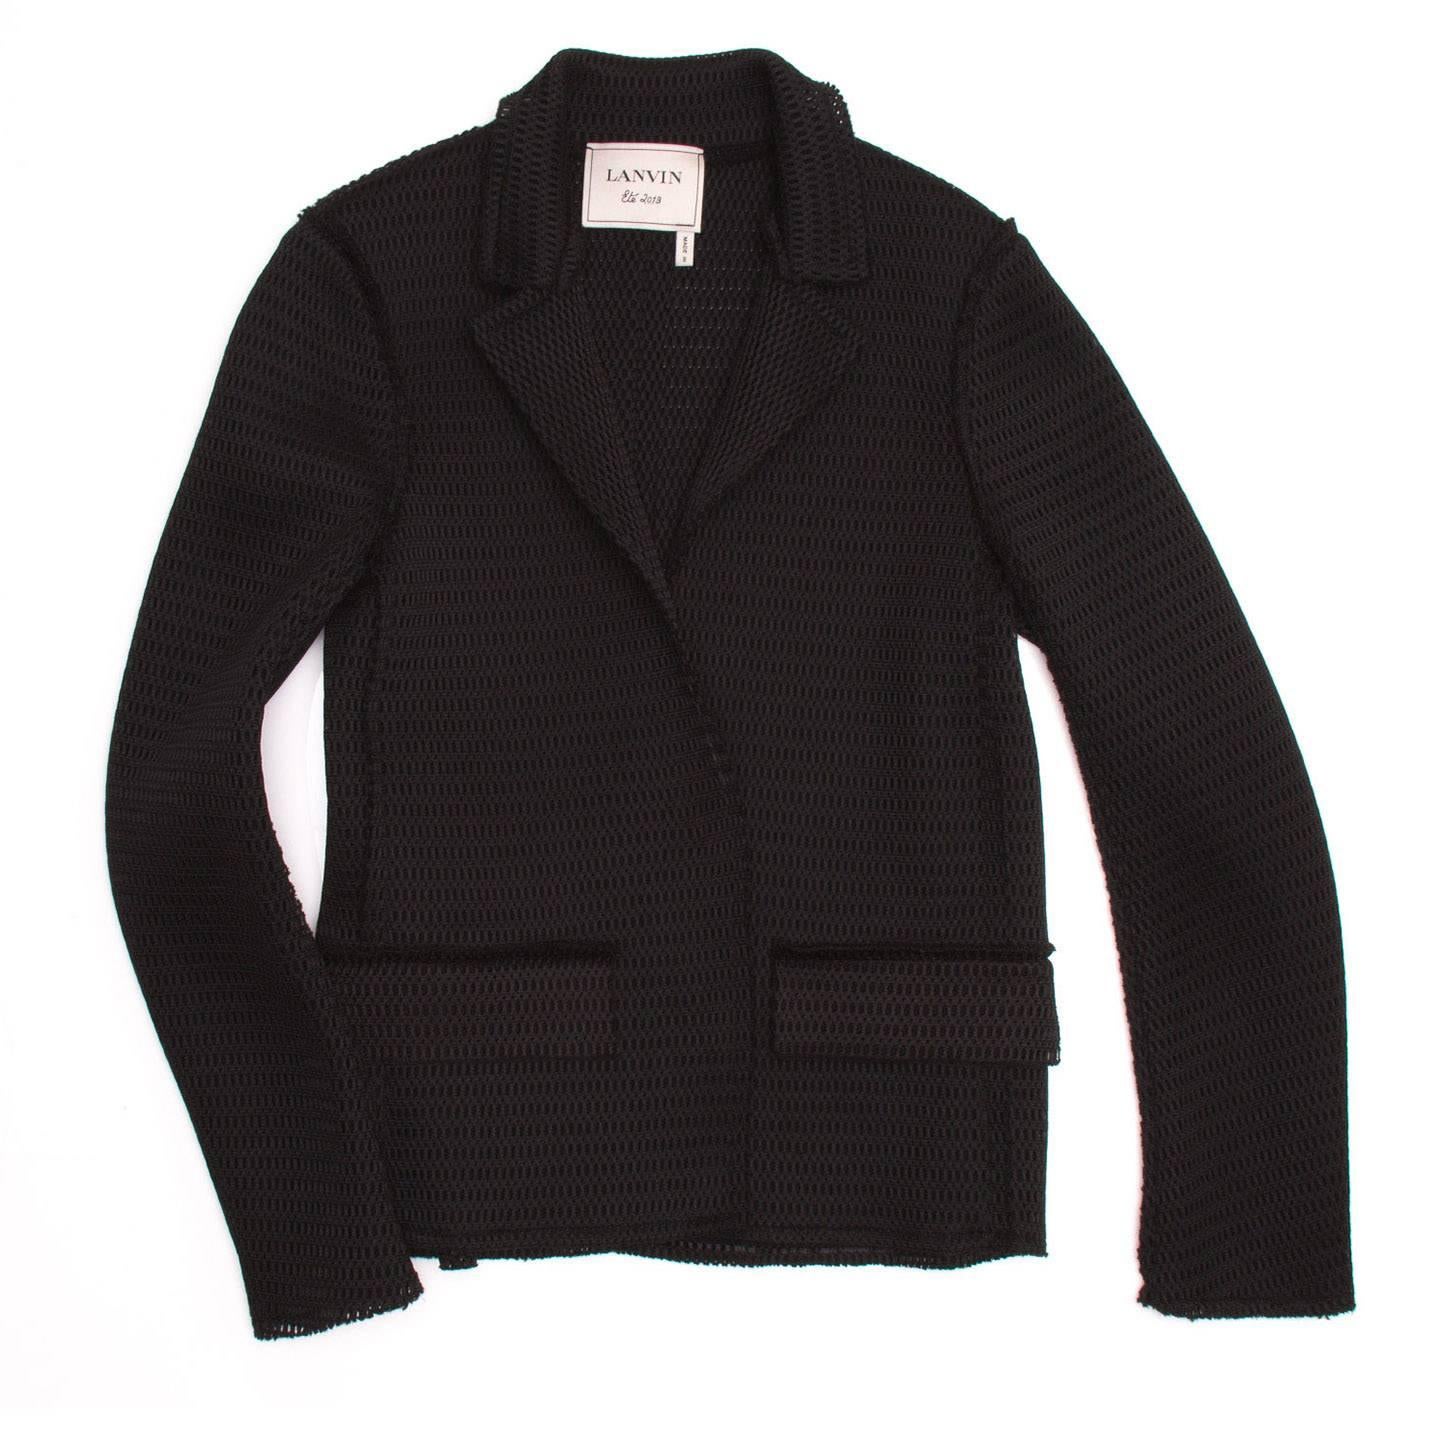 Lanvin 2013. Black single breasted perforated fabric blazer with large snap closures.

Size  42 French sizing

Condition  Excellent: never worn